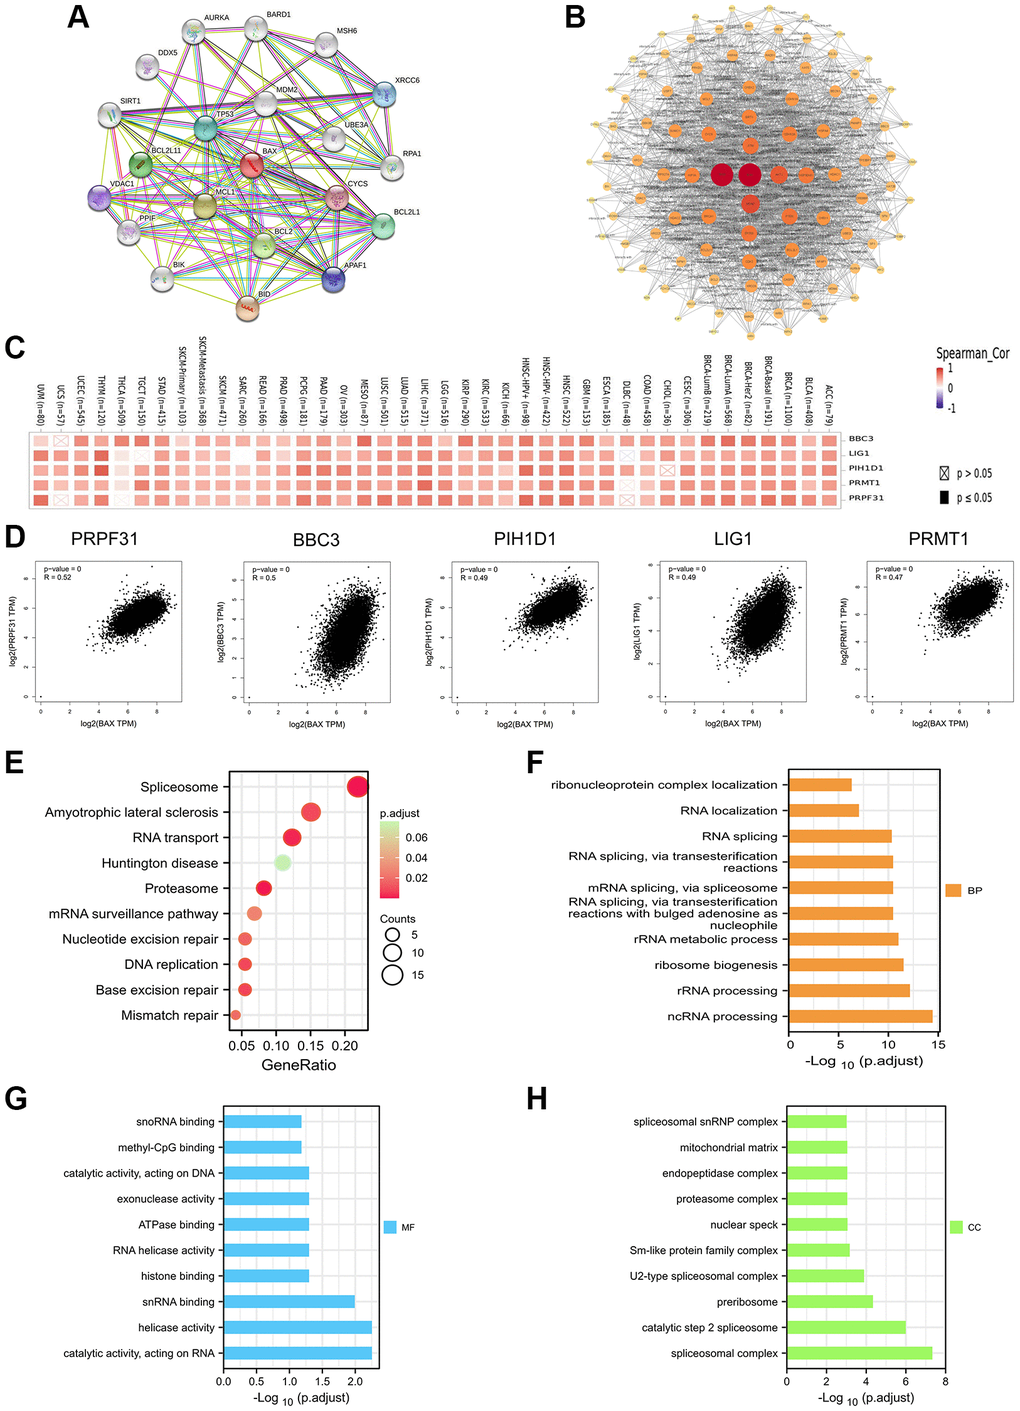 Enrichment analysis of BAX-related gene. (A) Analysis of twenty proteins interacting with BAX through STRING database. (B) Protein–protein interaction network of BAX was performed via the STRING database. (C) The heat map of correlation between BAX and the top 5 genes (PRPF31, BBC3, PIH1D1, LIG1 and PRMT1) in TCGA tumors. (D) Correlation of BAX and the top 5 genes in the cancer types of TCGA. (E) Bubble plot for KEGG pathway analysis. (F–H) GO enrichment analysis of the top 100 genes that associated with BAX expression.